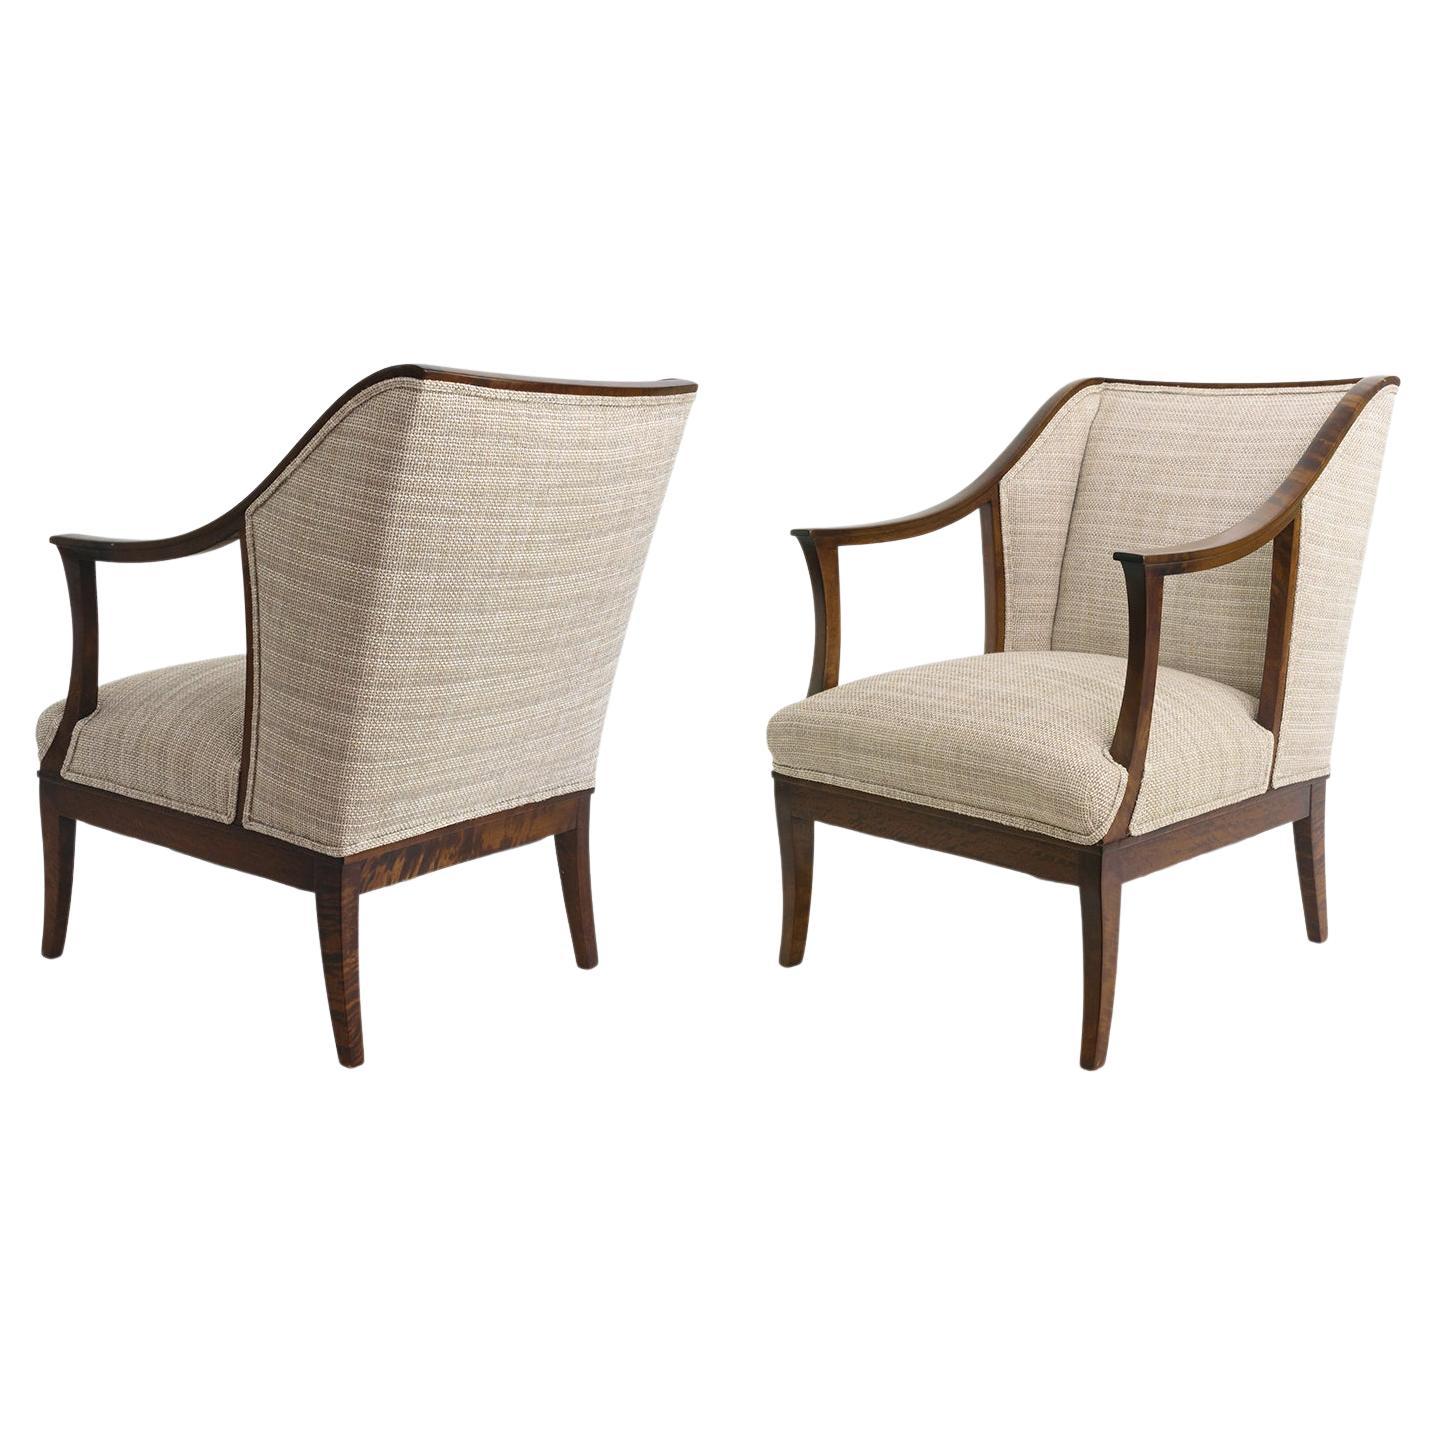 Swedish Armchairs in Stained Solid Birch, by SFM Bodafors, circa 1930